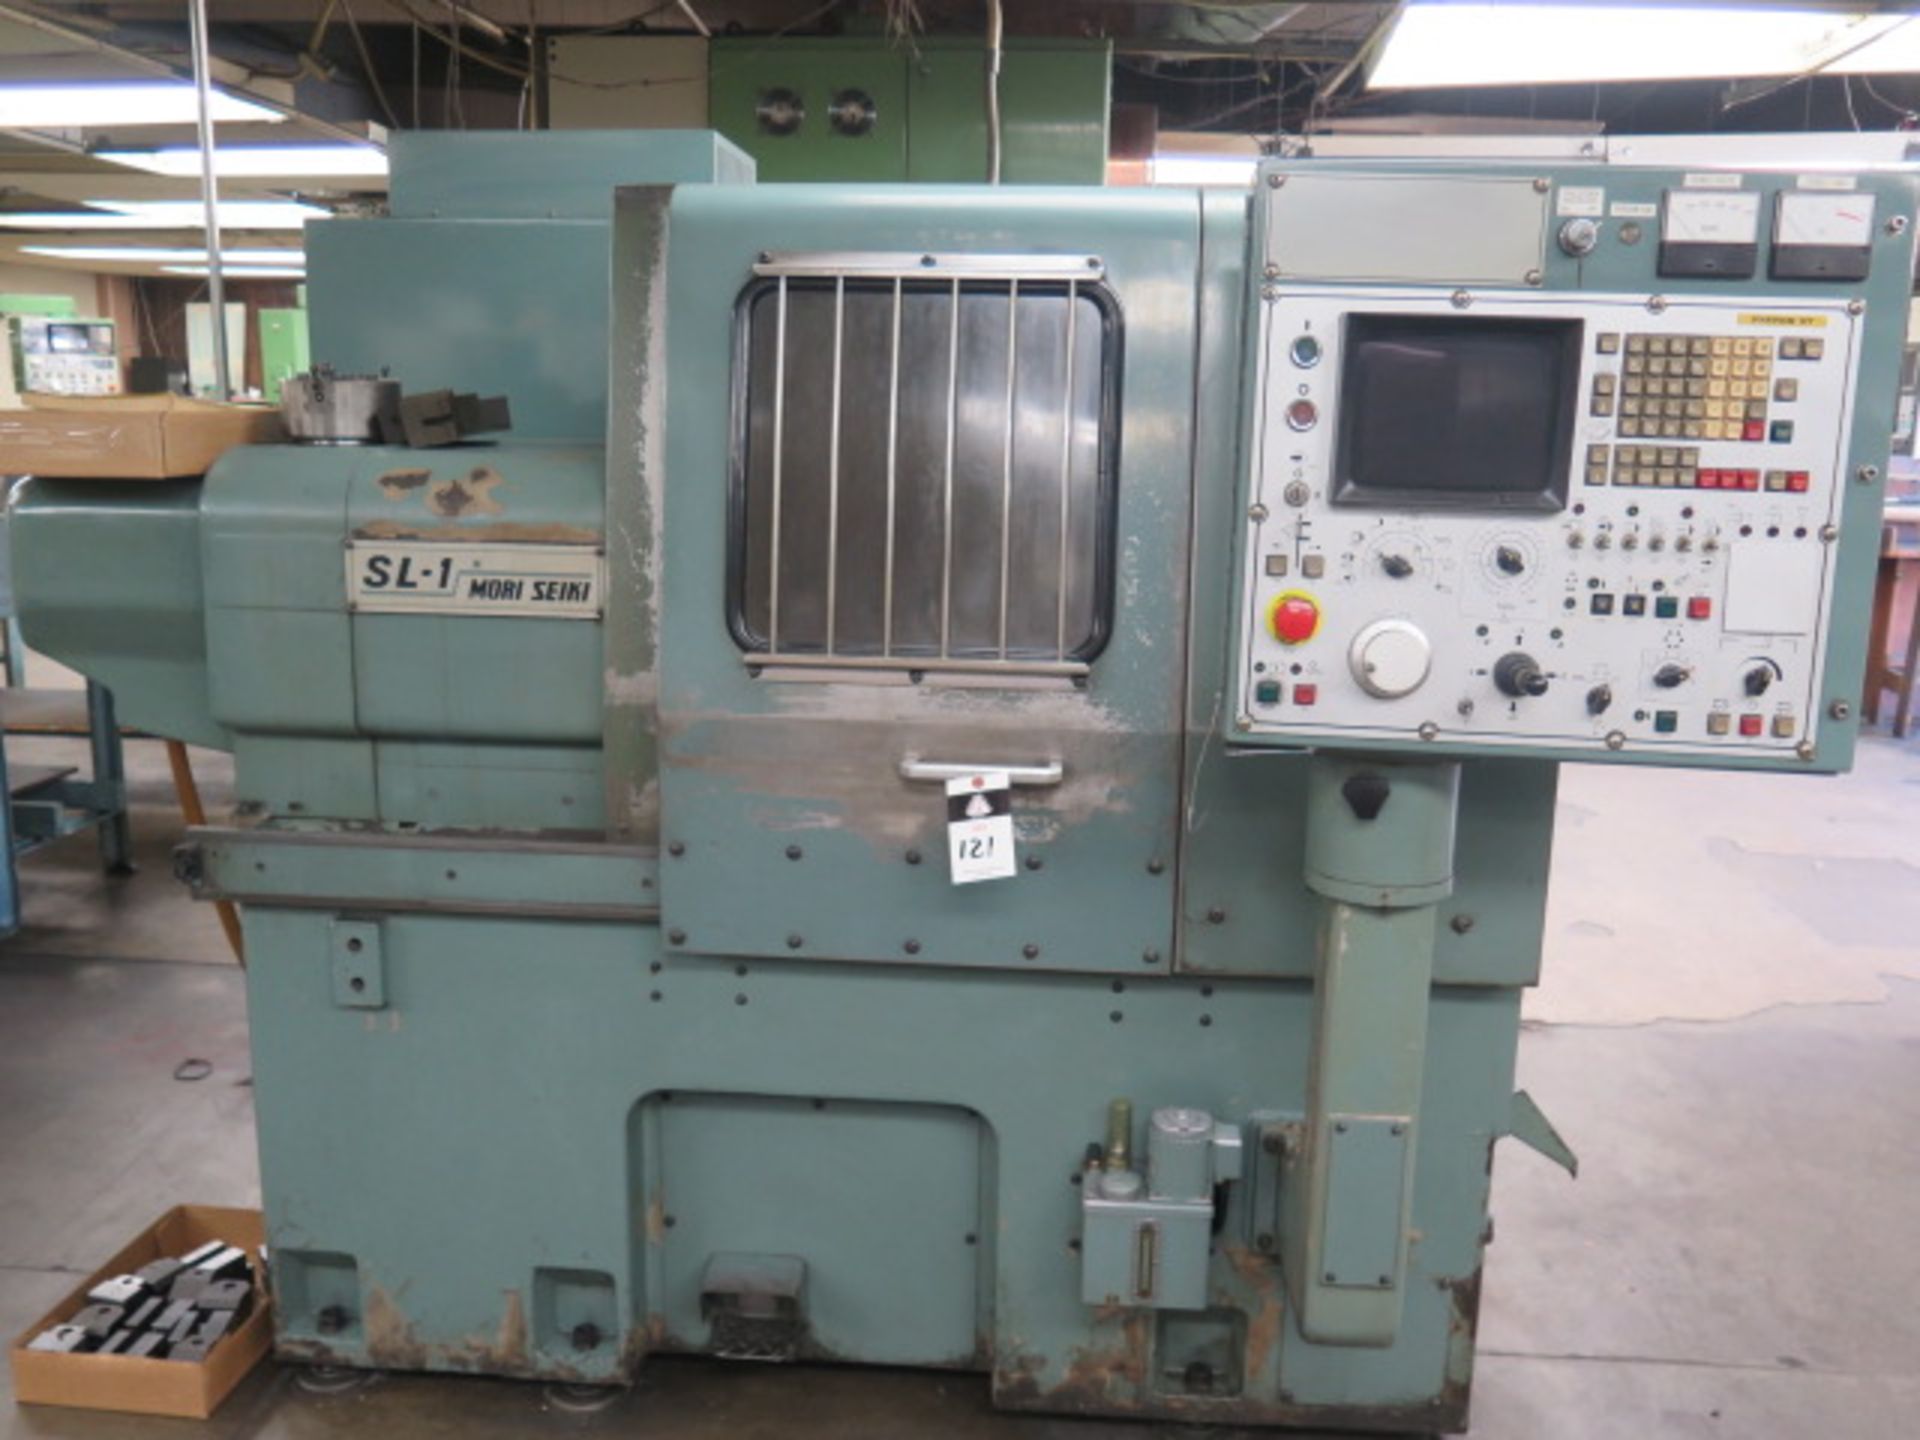 Mori Seiki SL-1H CNC Turning Center s/n 1168 w/ Fanuc 6T Controls, 8-Station Turret, SOLD AS IS